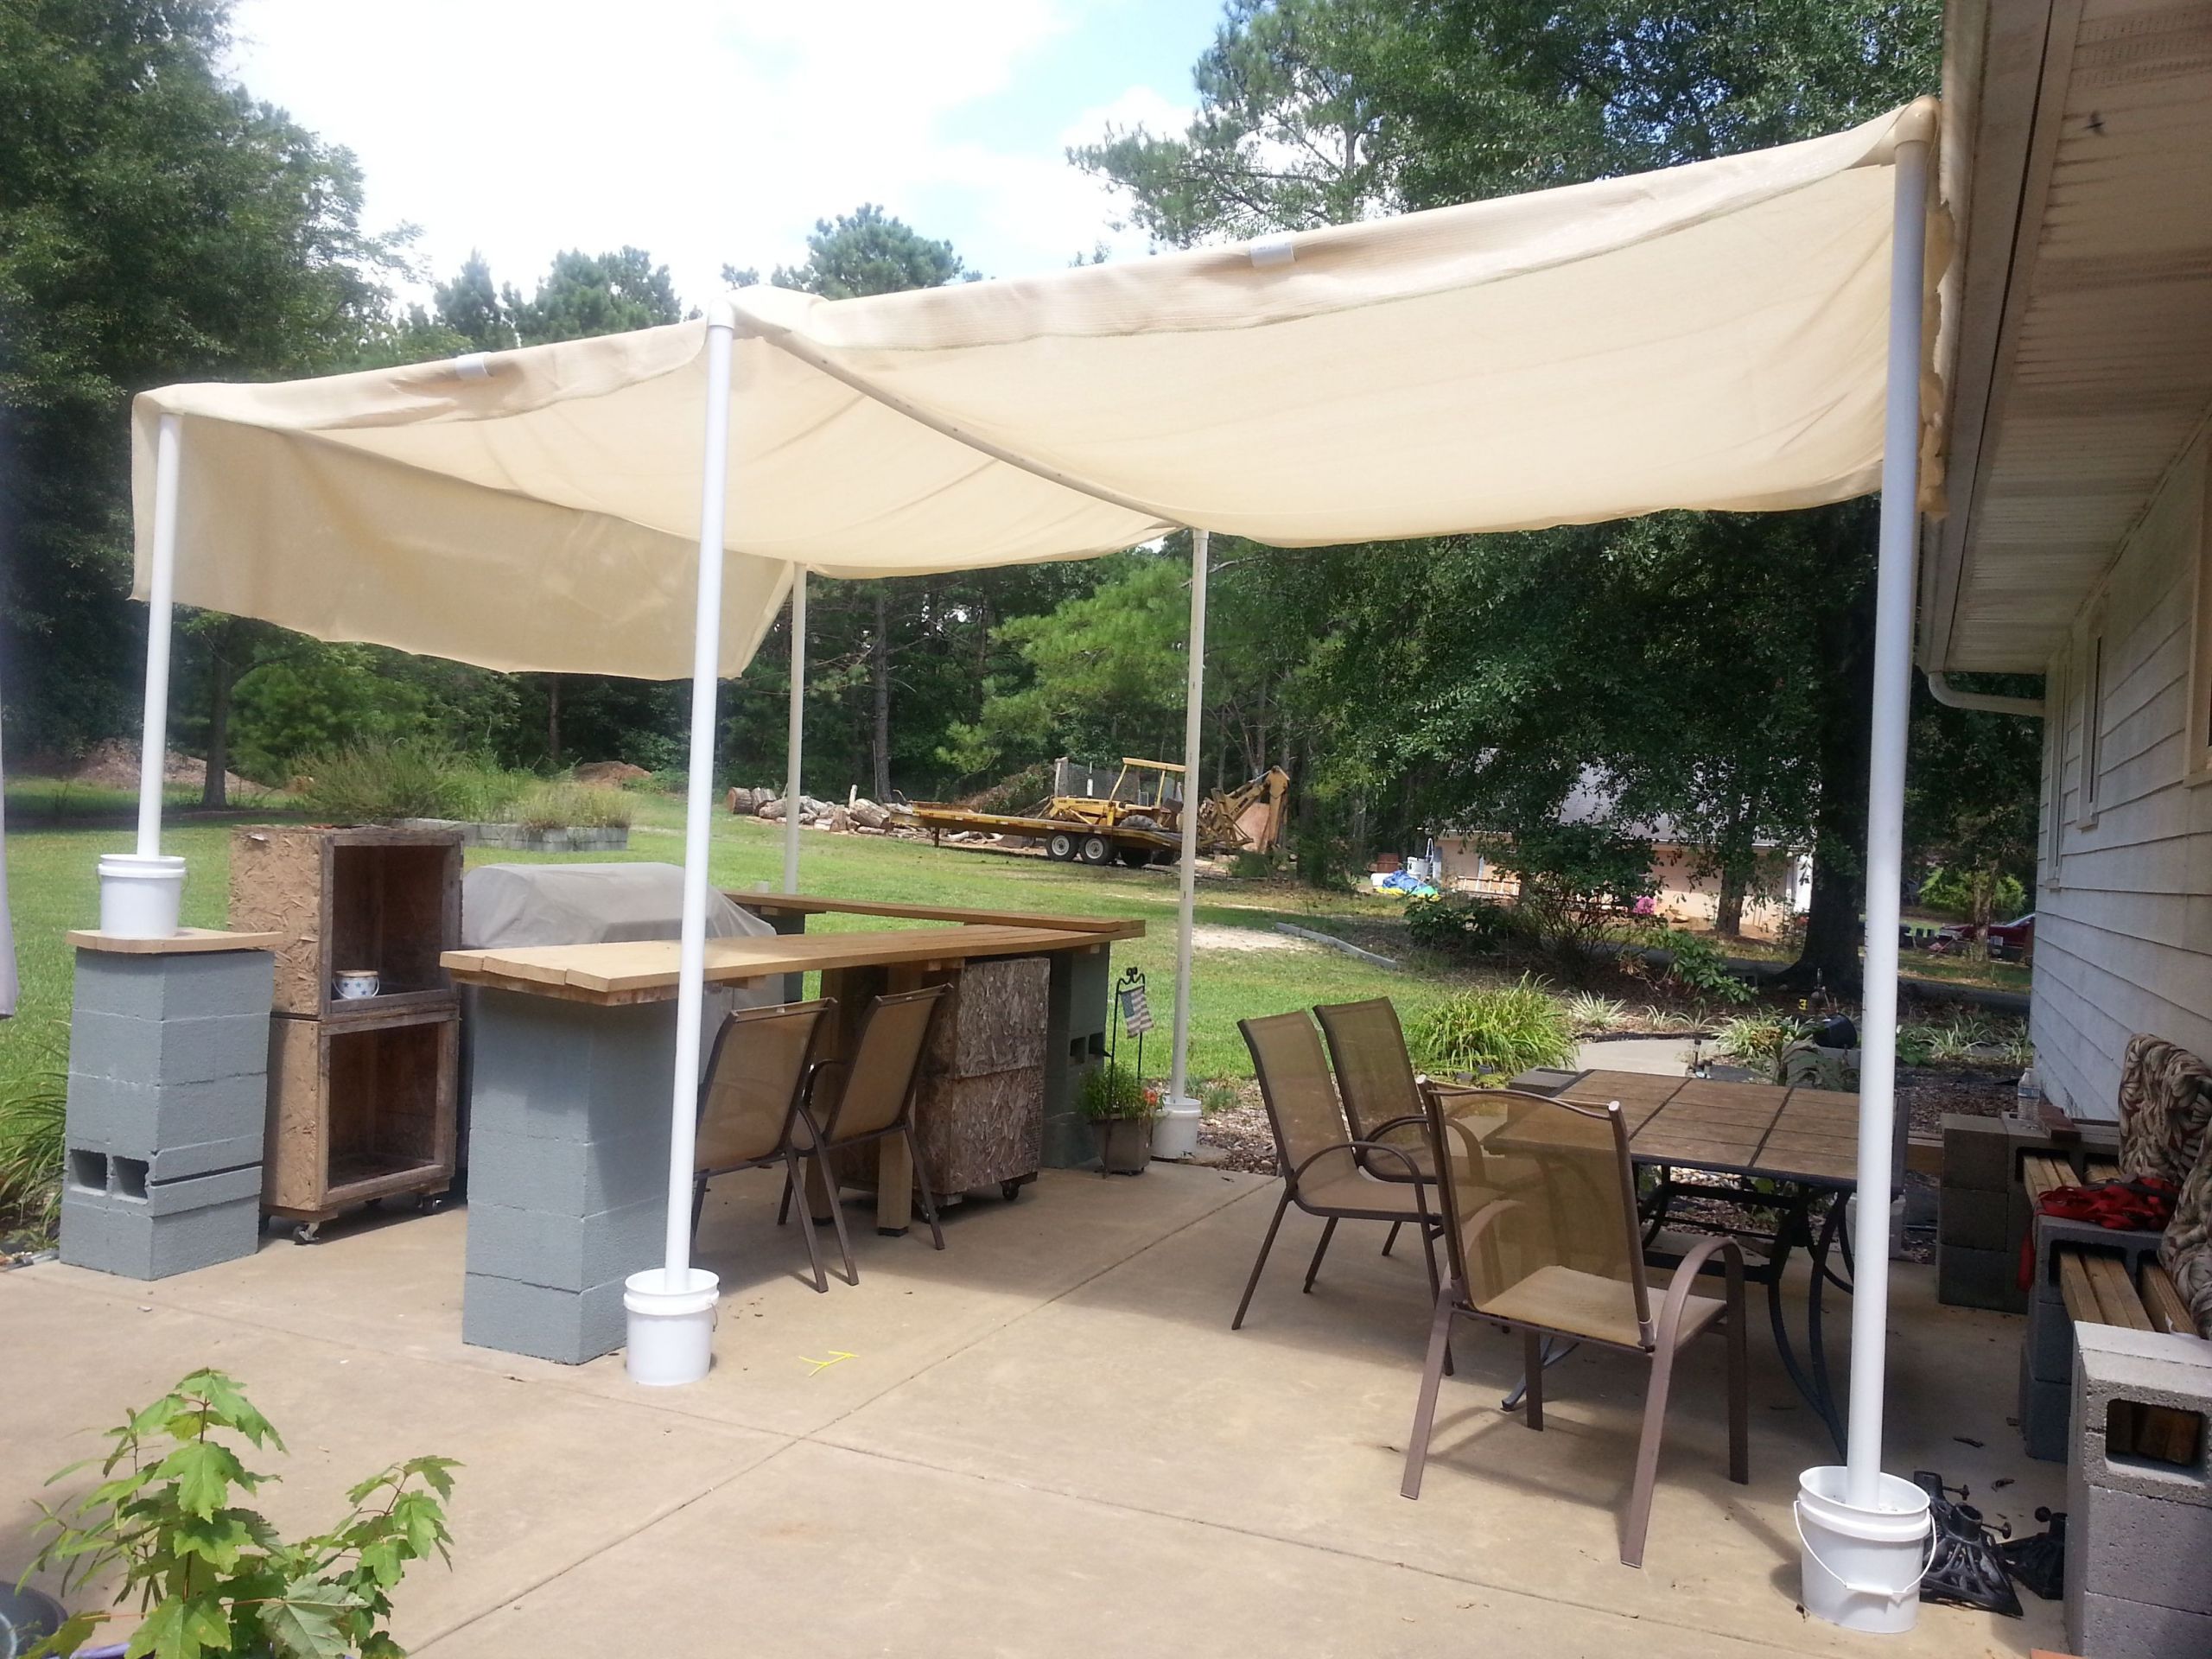 DIY Outdoor Shade Canopy
 Made this canopy to cover the bar seating area this